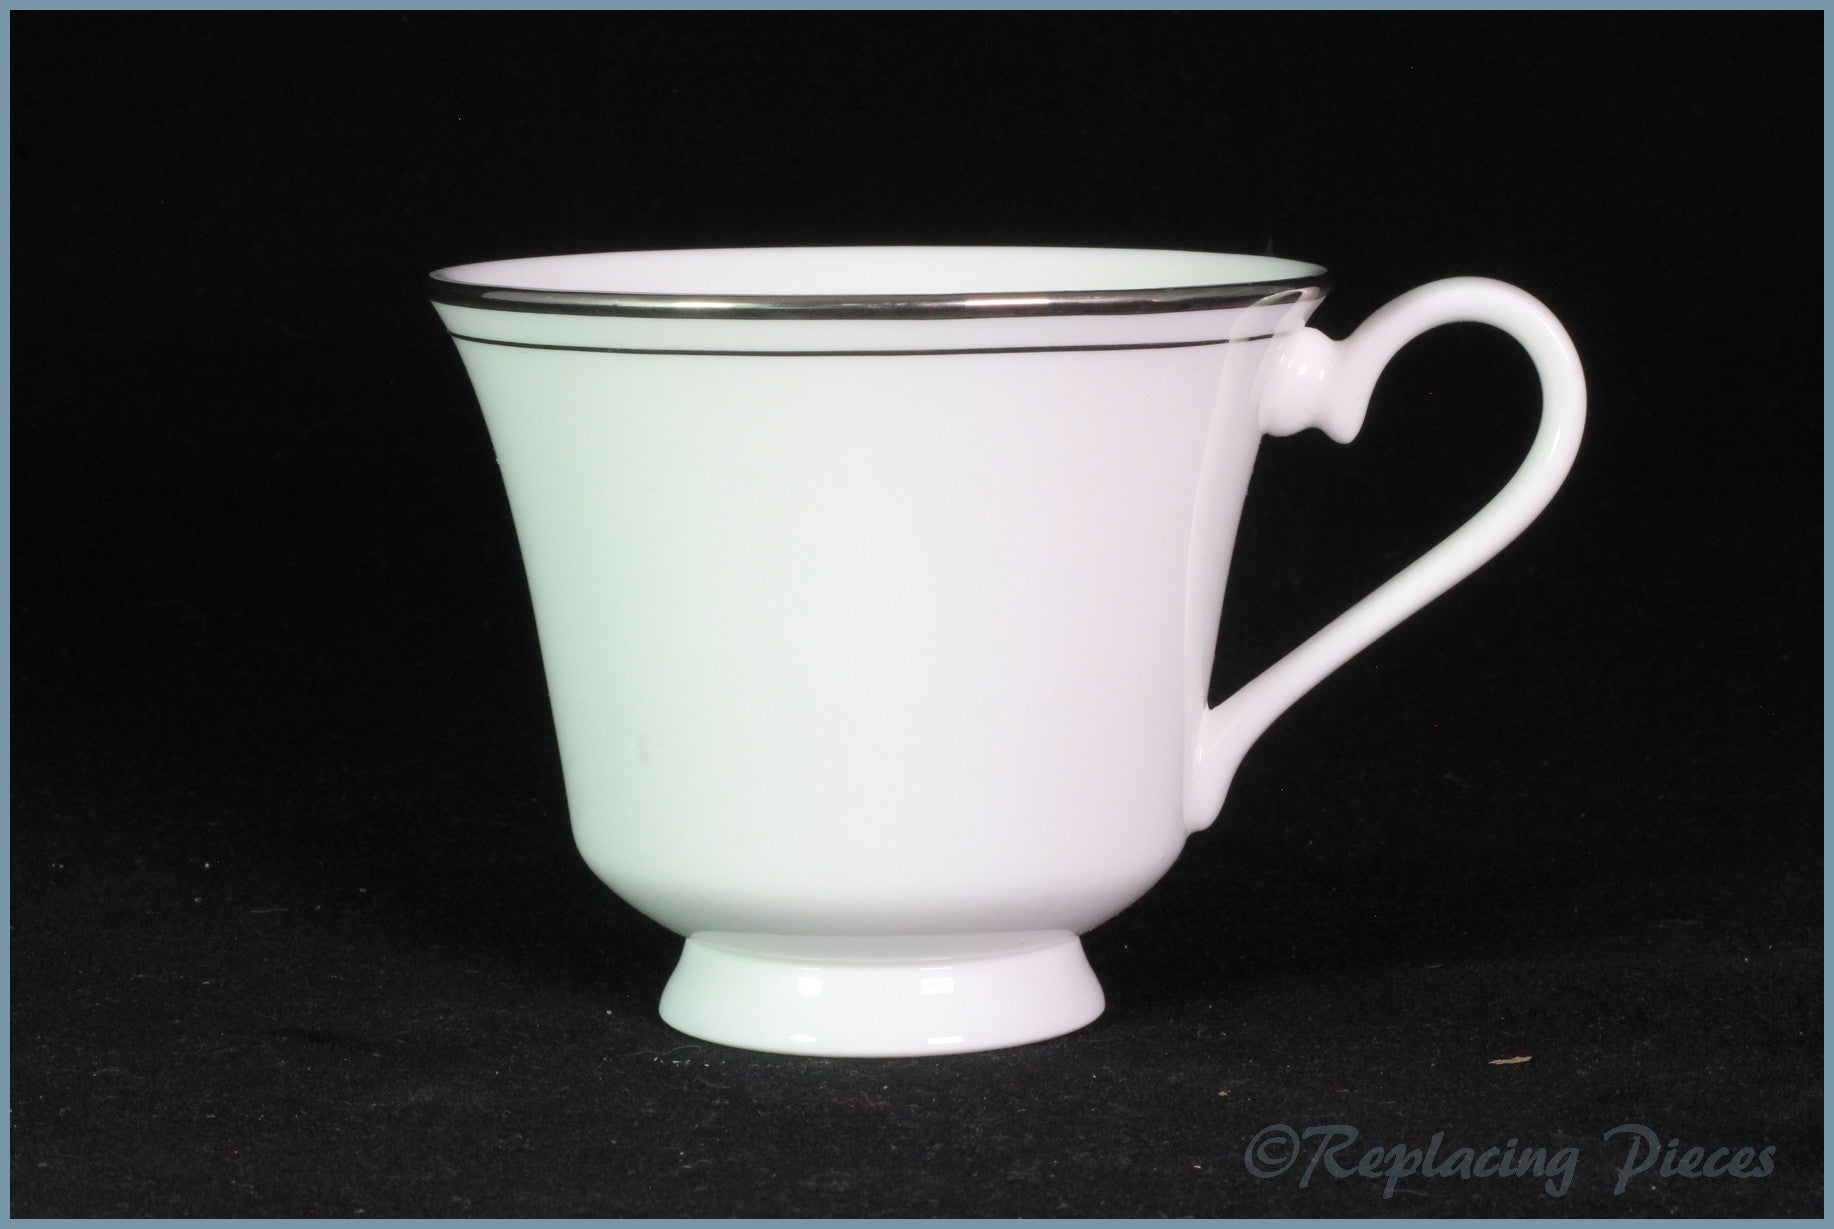 Royal Doulton - Platinum Concord (H5048) - Teacup (Footed)